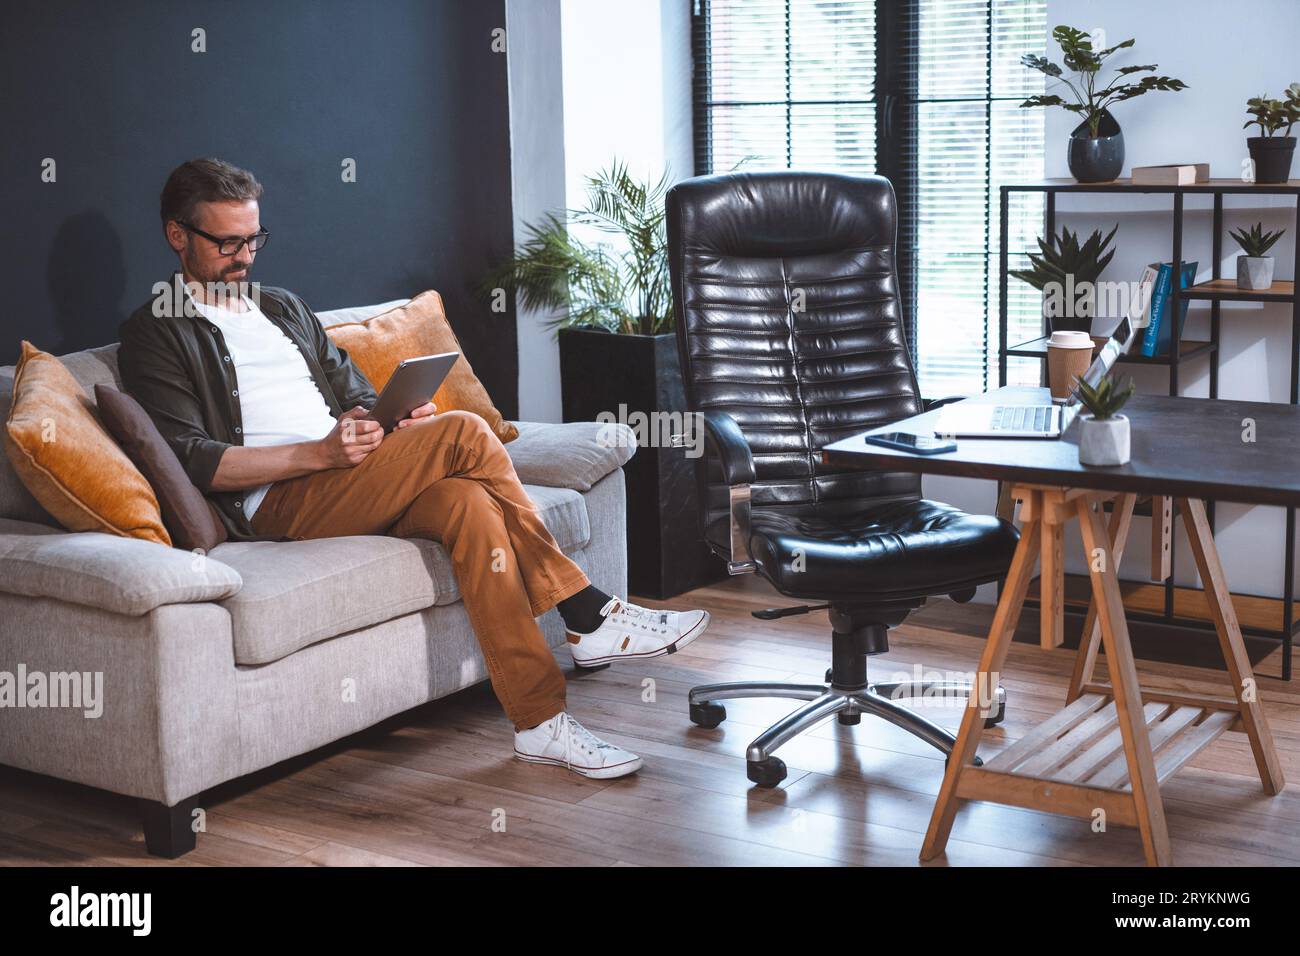 Freelancer sitting on sofa, looking relaxed as he uses tablet PC. Laptop on desk and empty chair can be seen nearby in room. Con Stock Photo